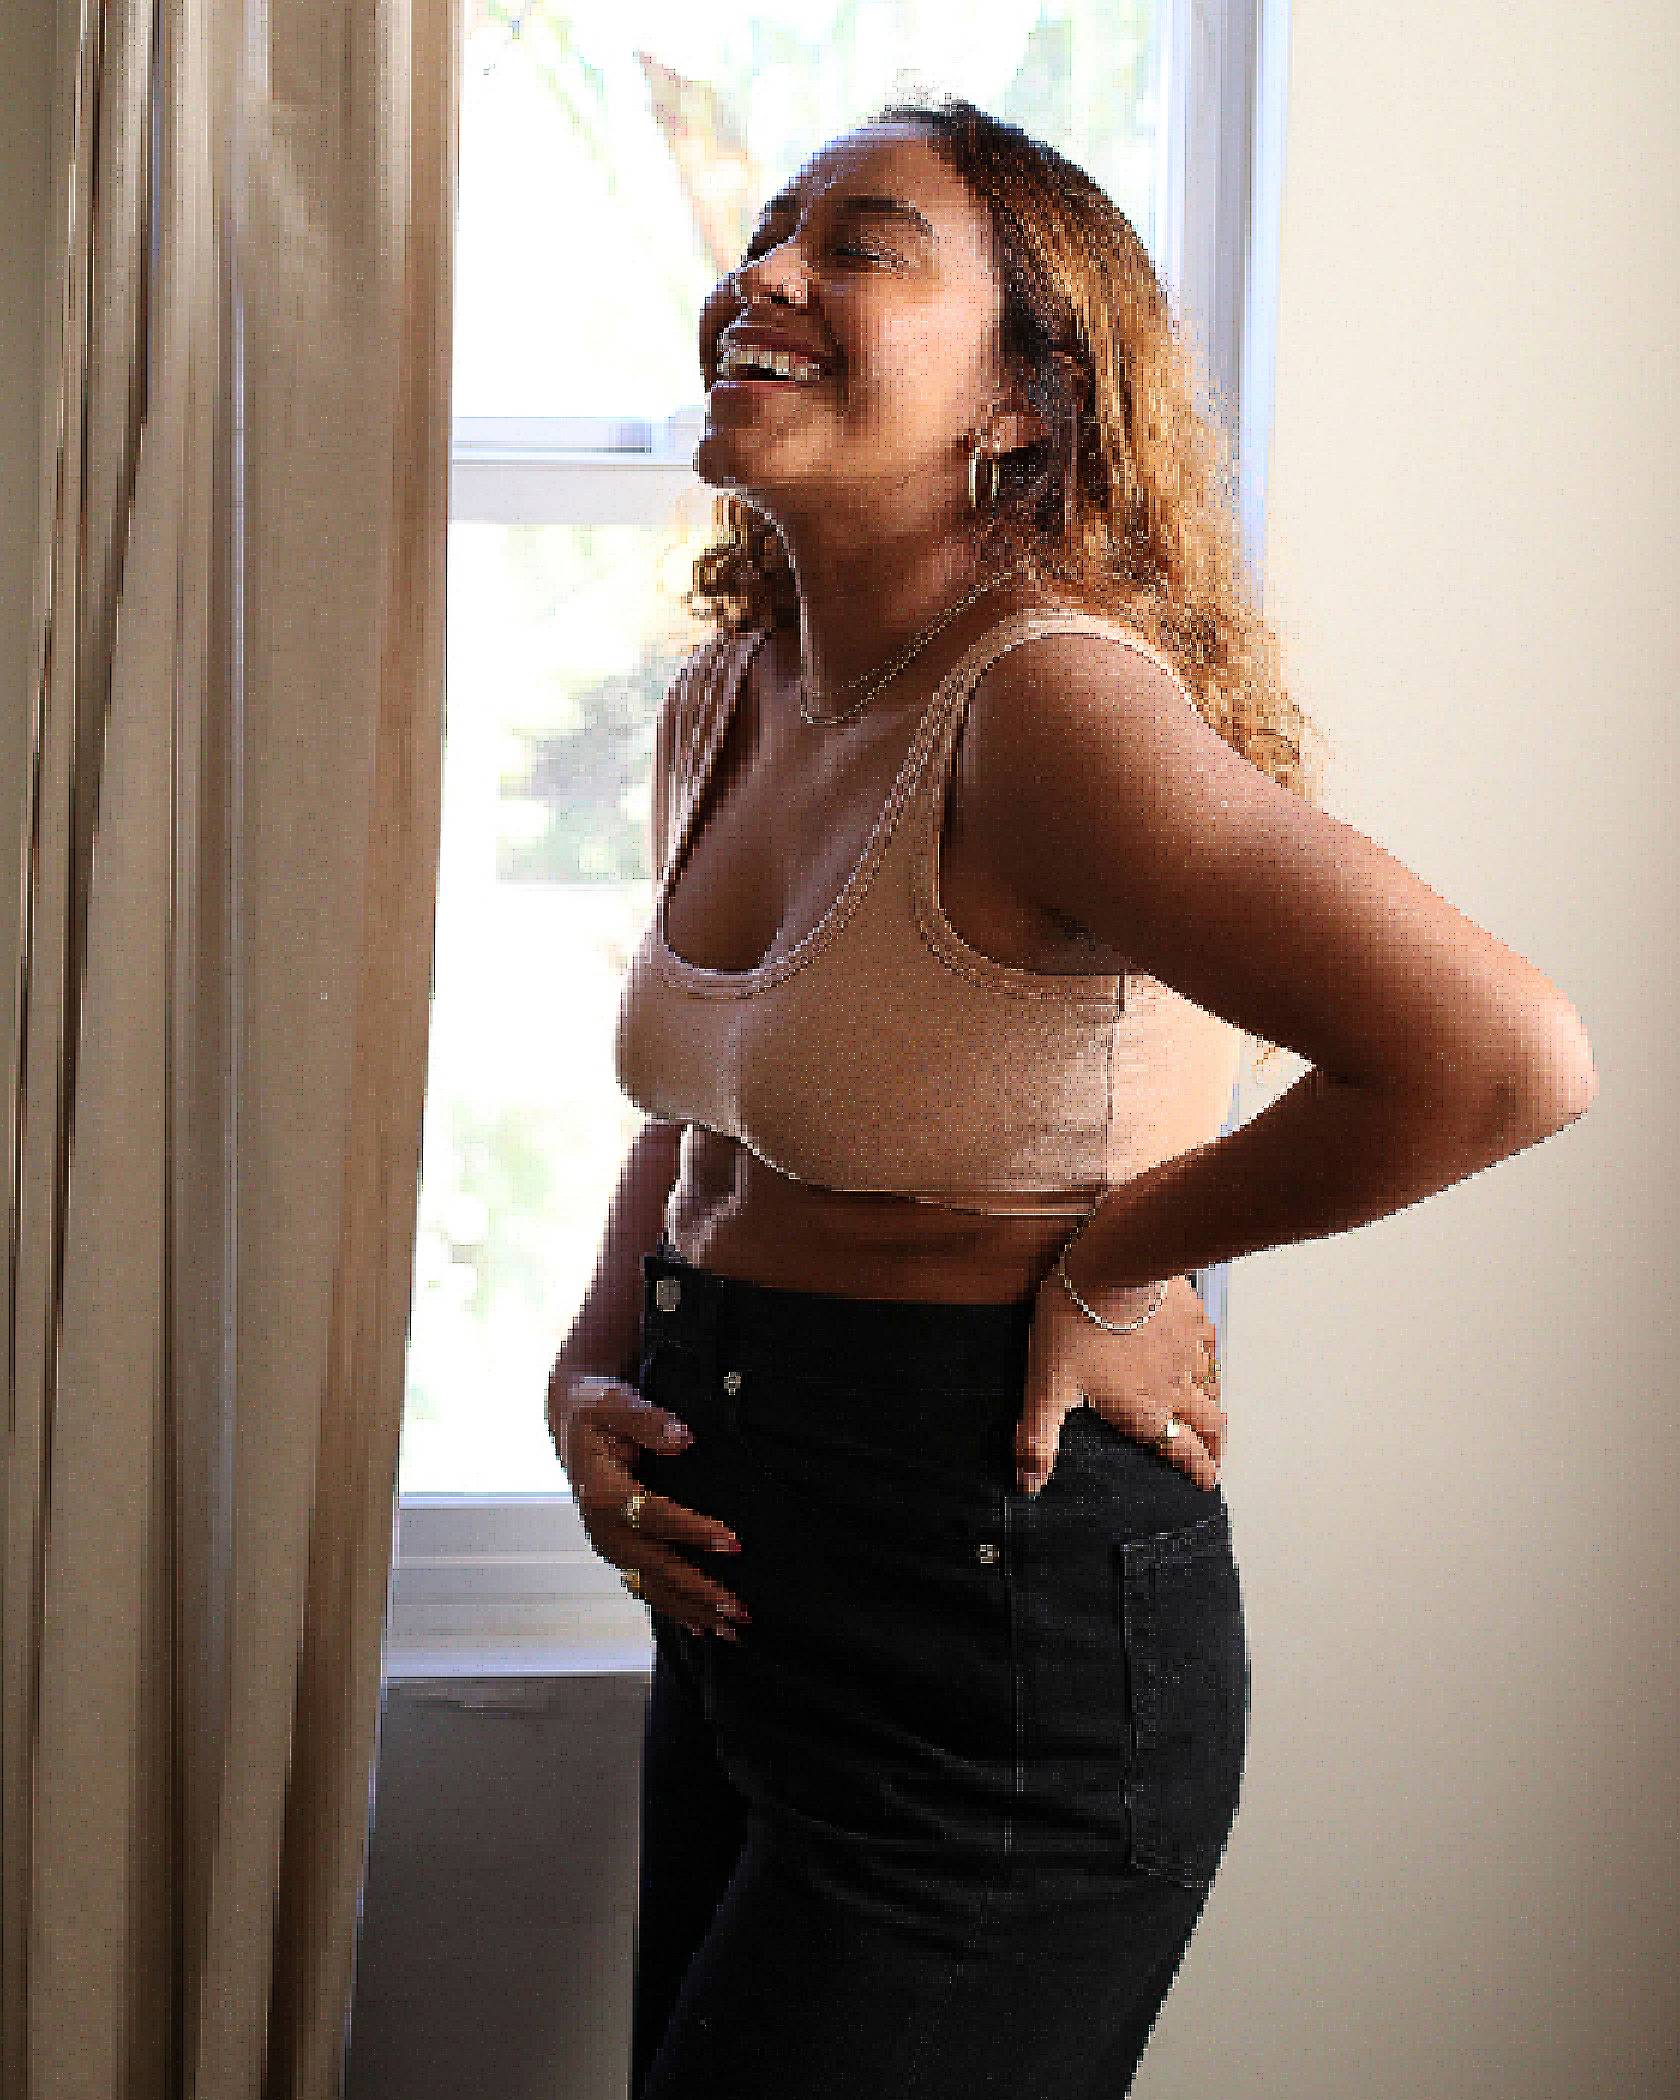 Photo of Evelynn Escobar-Thomas holding her pregnant belly and throwing her head back in laughter. She is wearing a peach sports bra and black jeans.